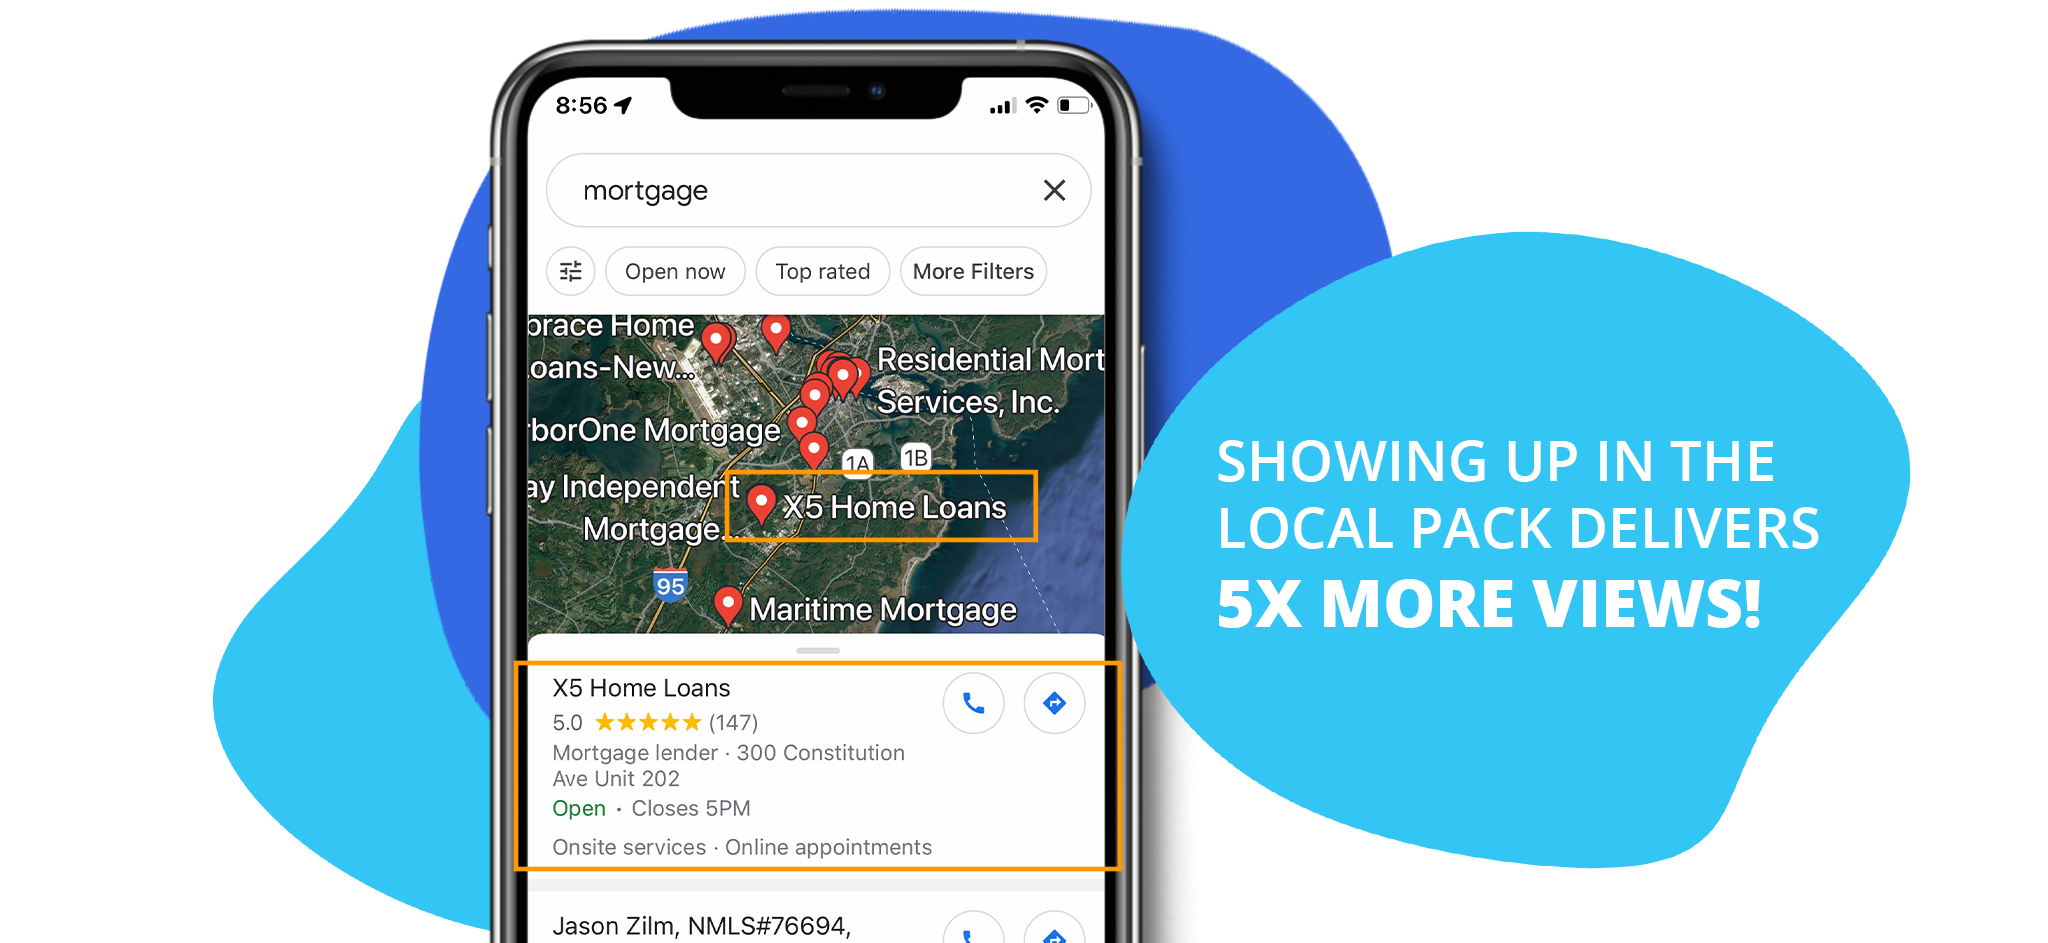 leadpops helped X5 Home Loans achieve the top ranking in the Google Local Pack